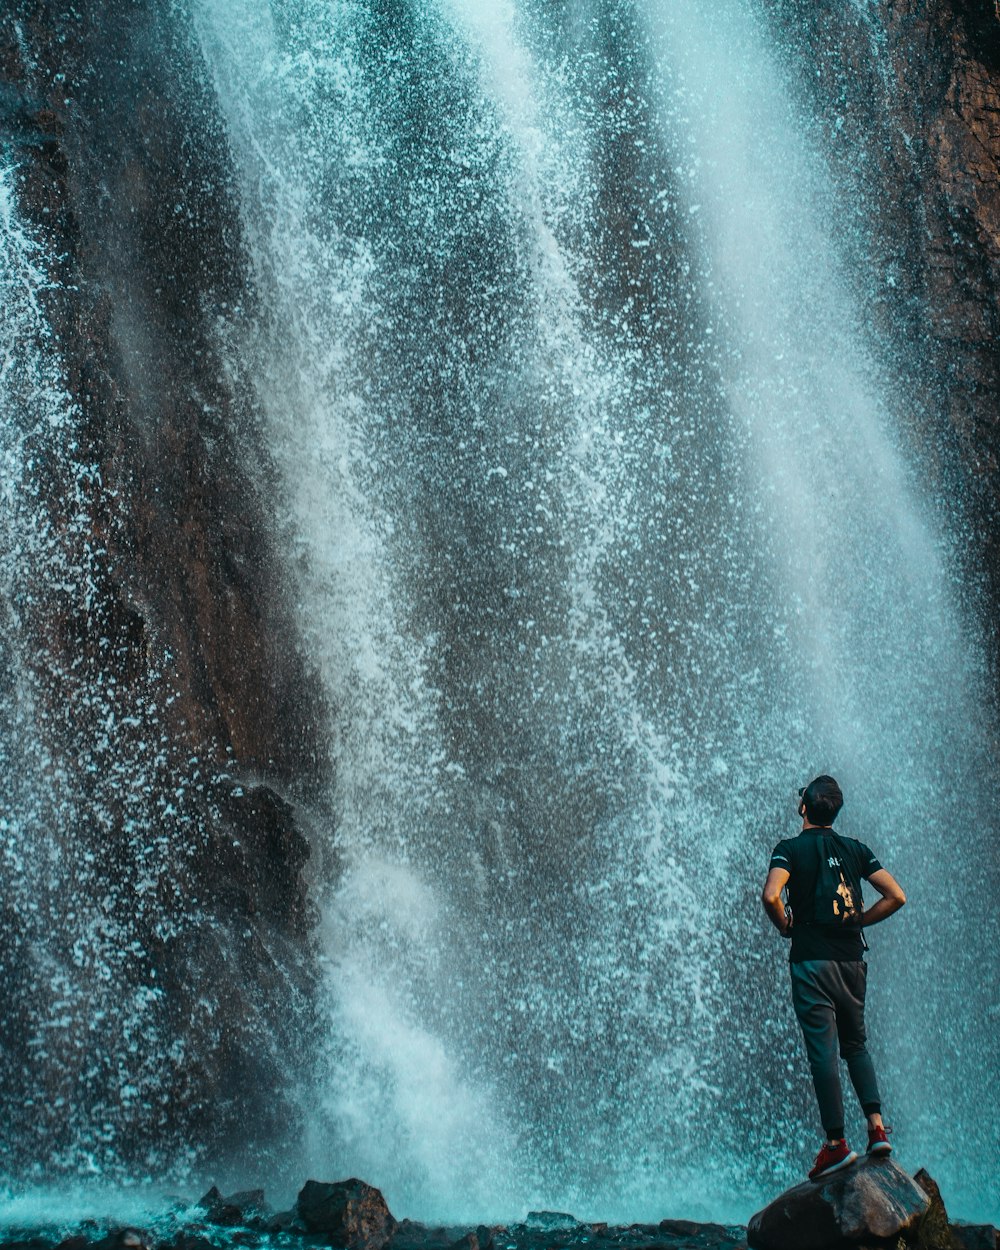 man in black jacket and black pants standing in front of water falls